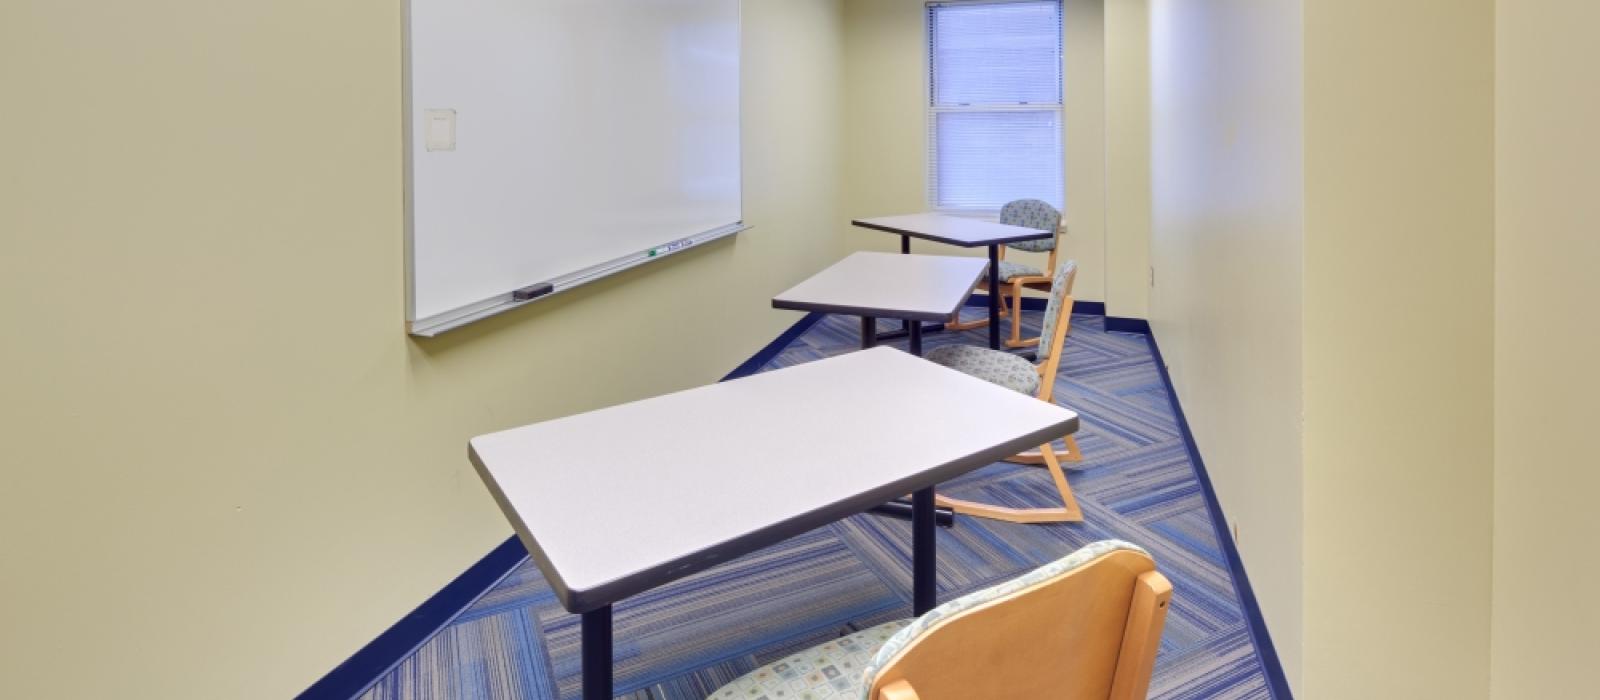 Study room, with desks, chairs and a white board.